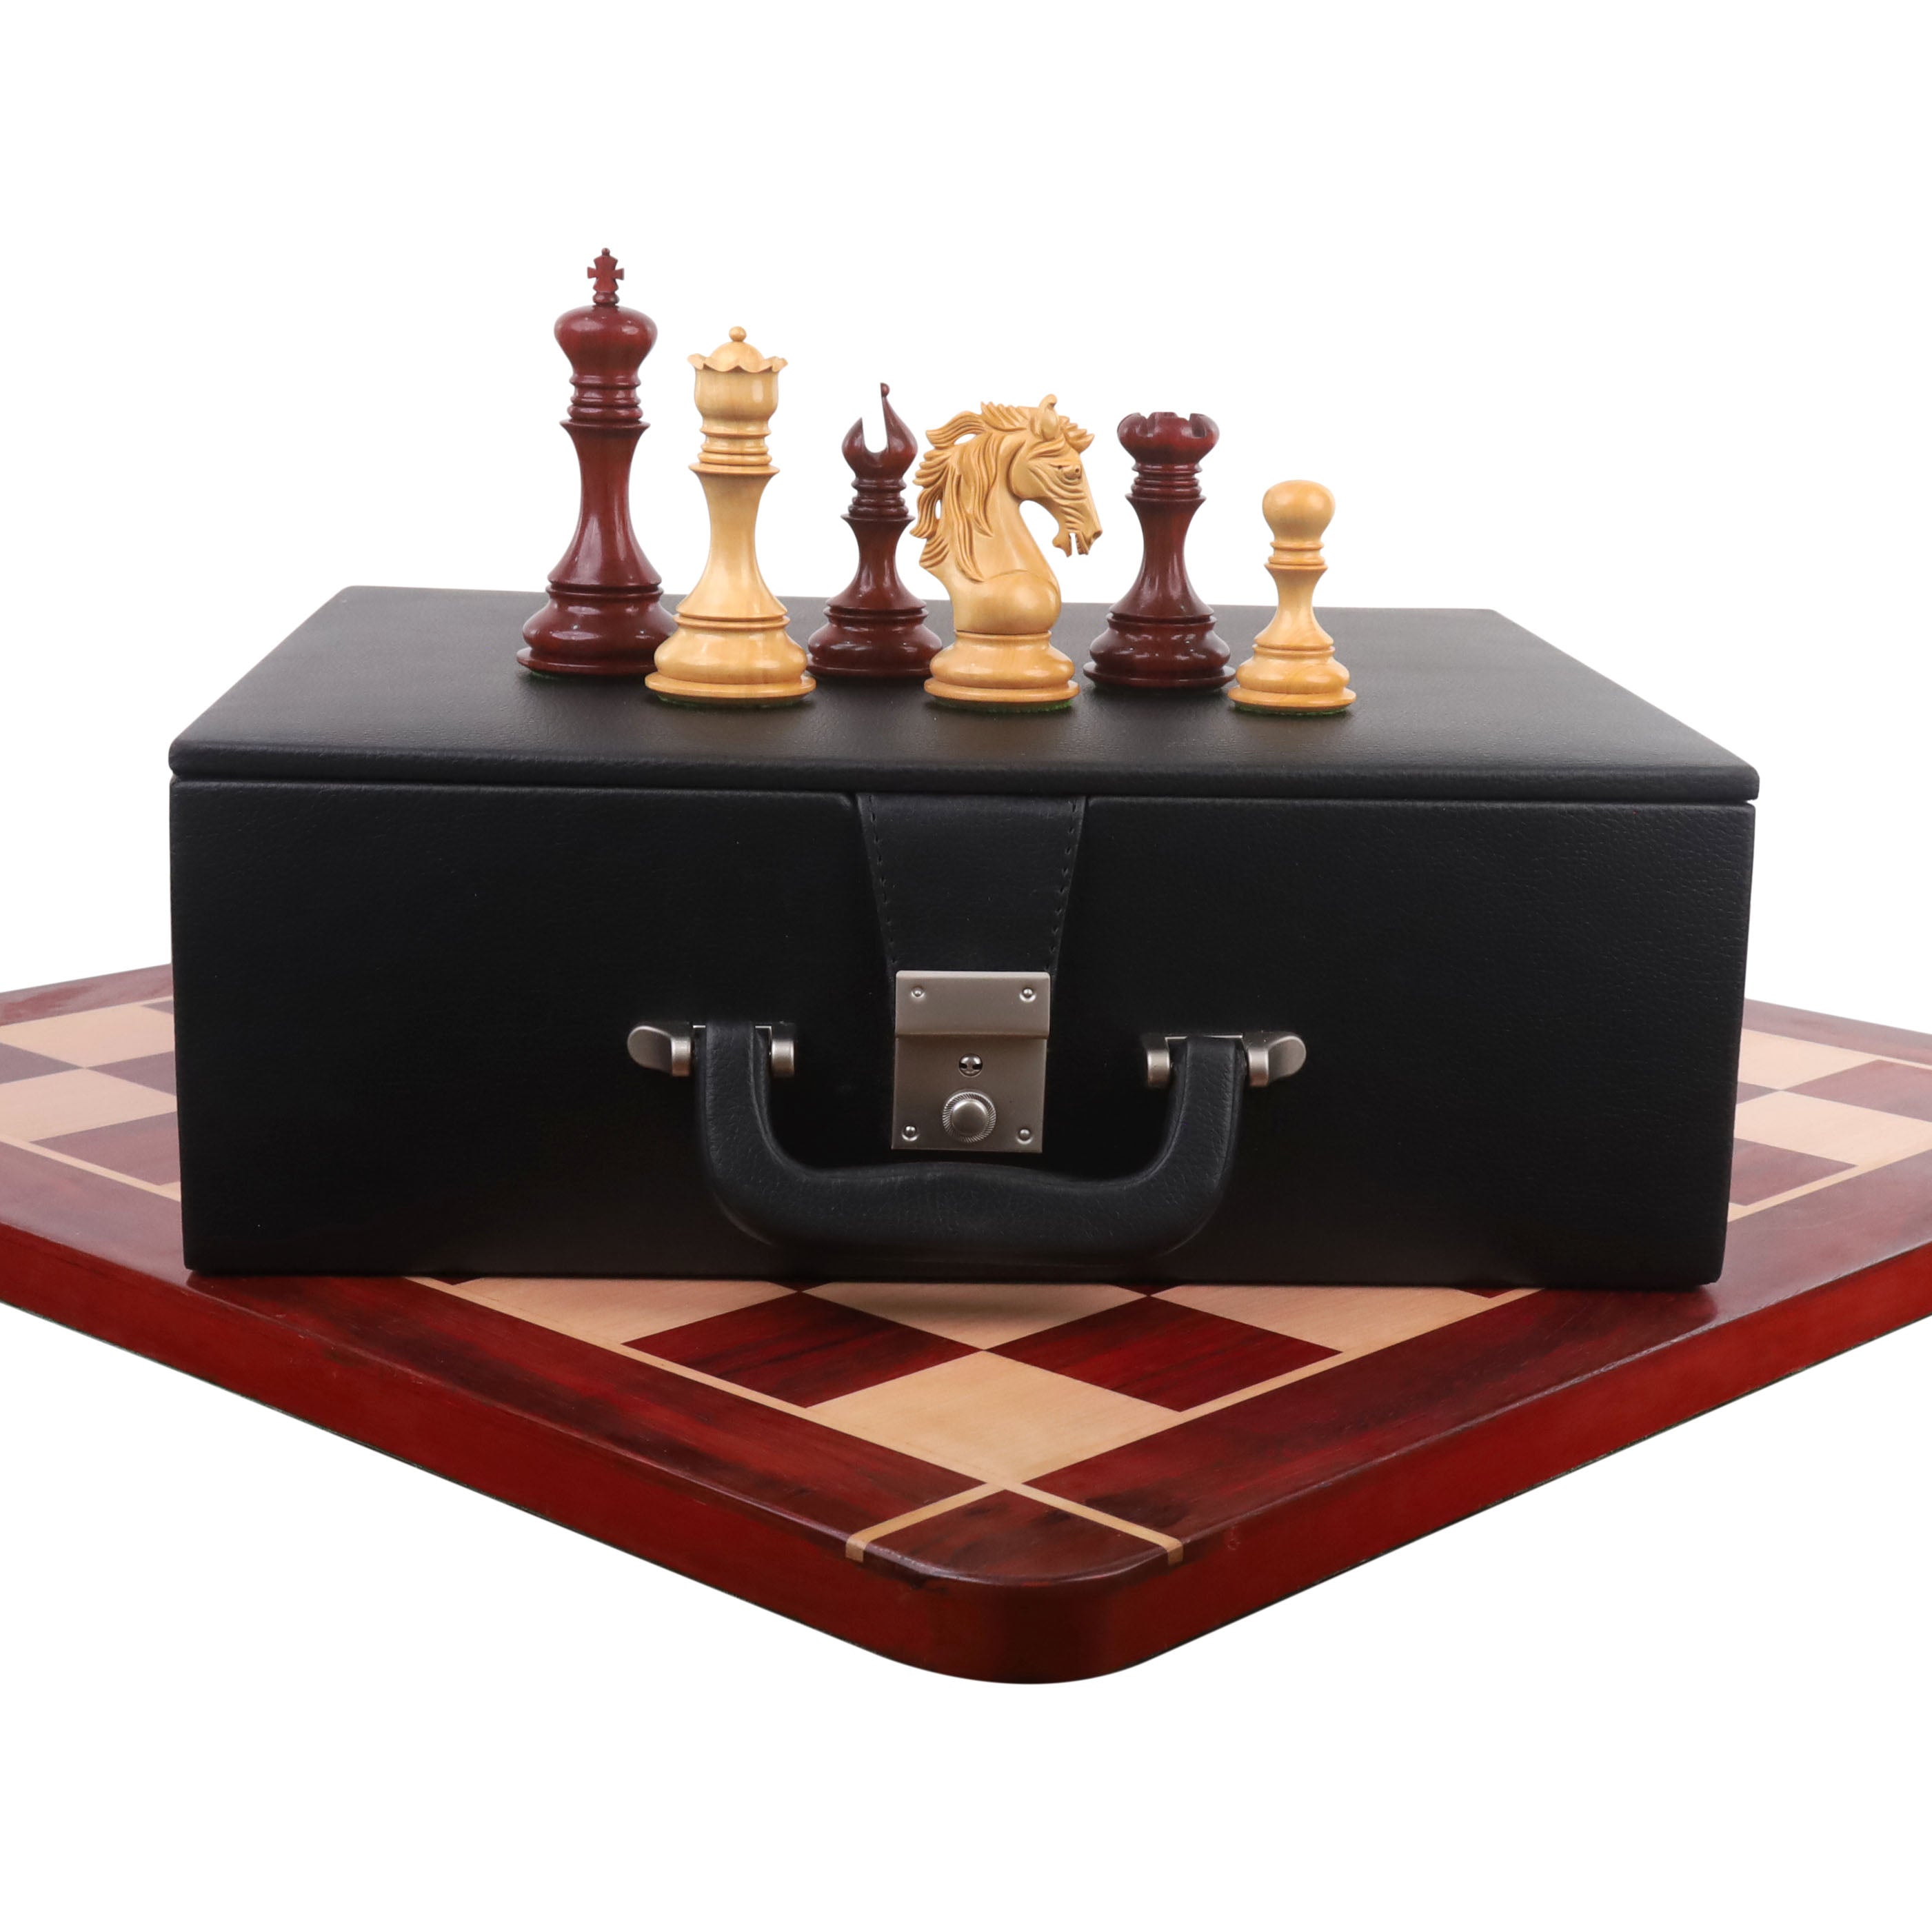 Wooden Chess Set - Buy Wooden Chess Sets at Royal Chess Mall